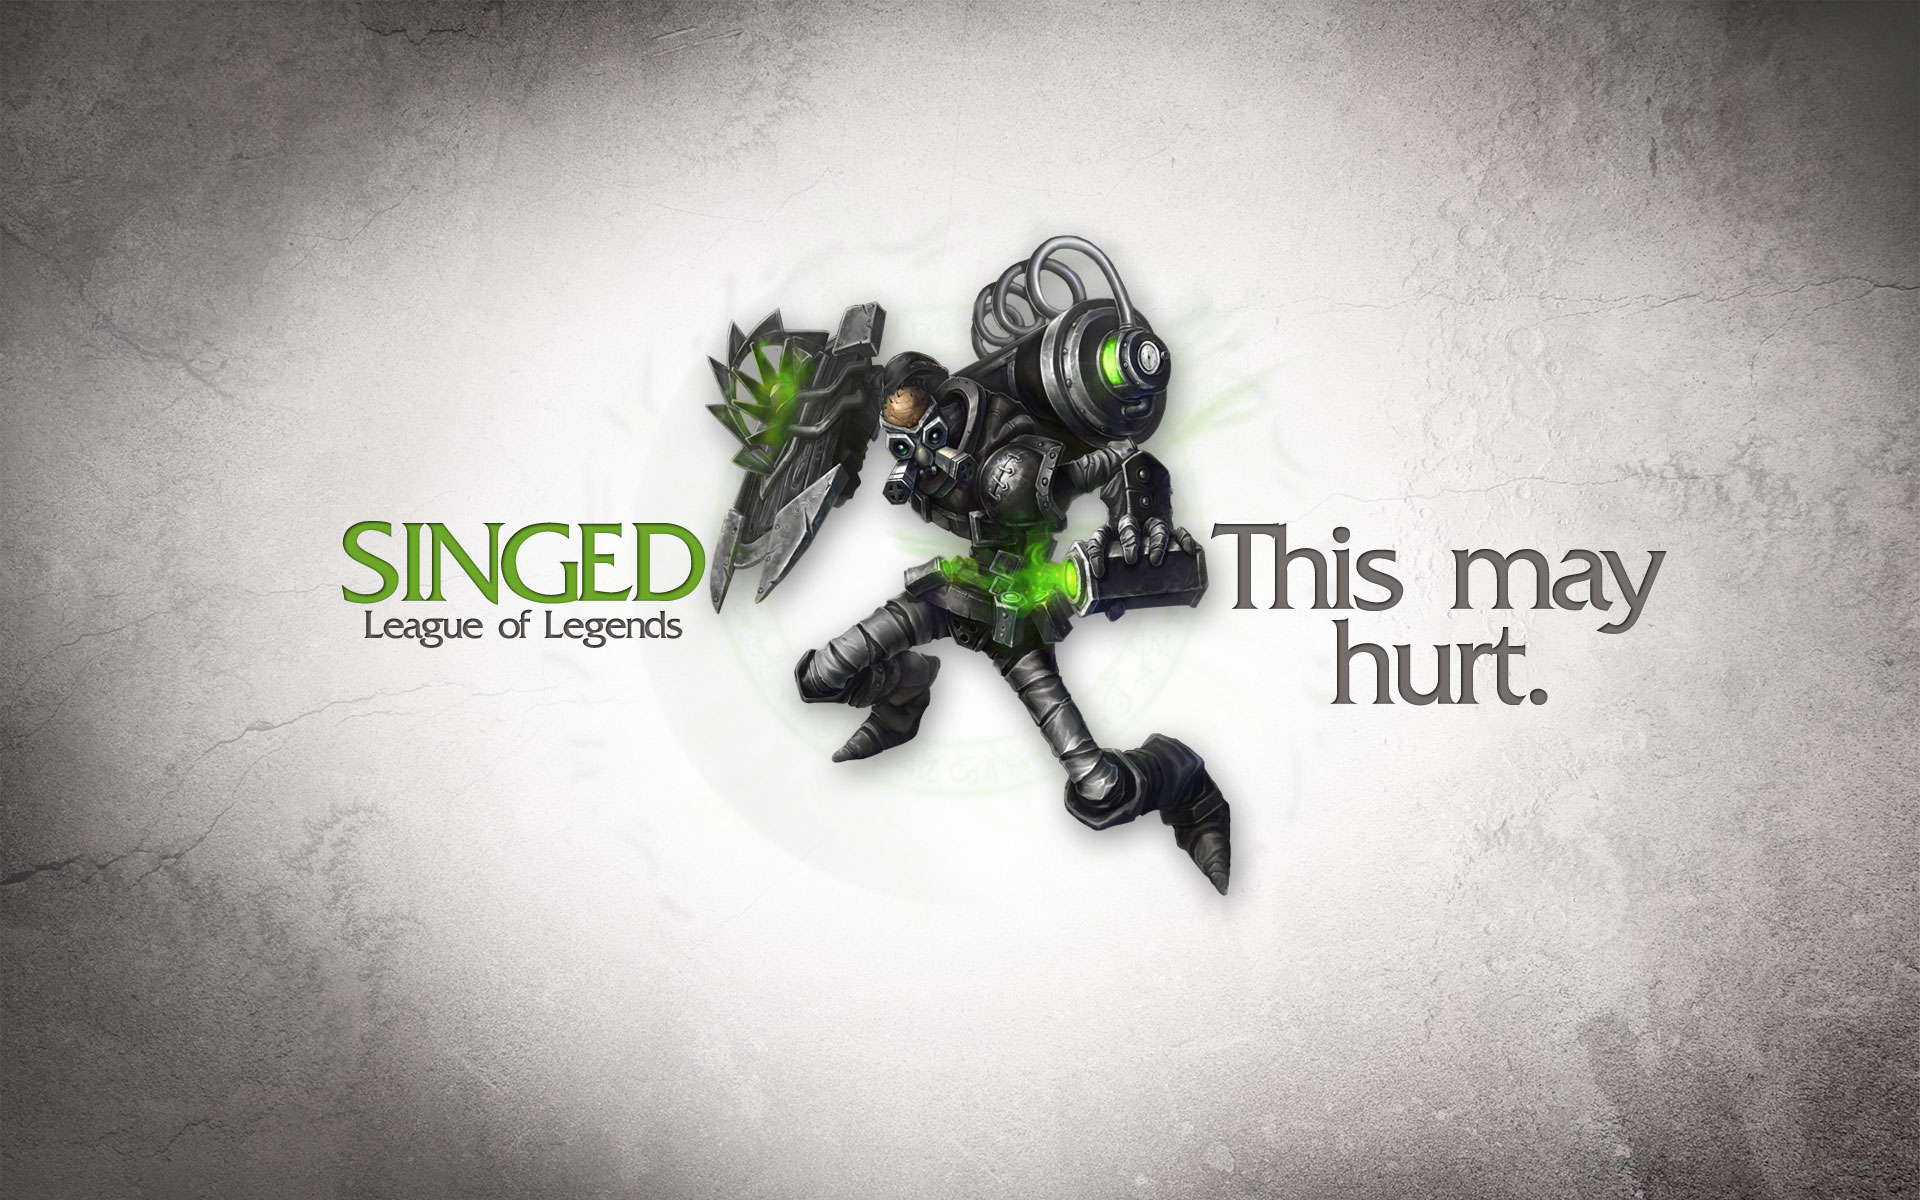 singed (league of legends), video game, league of legends